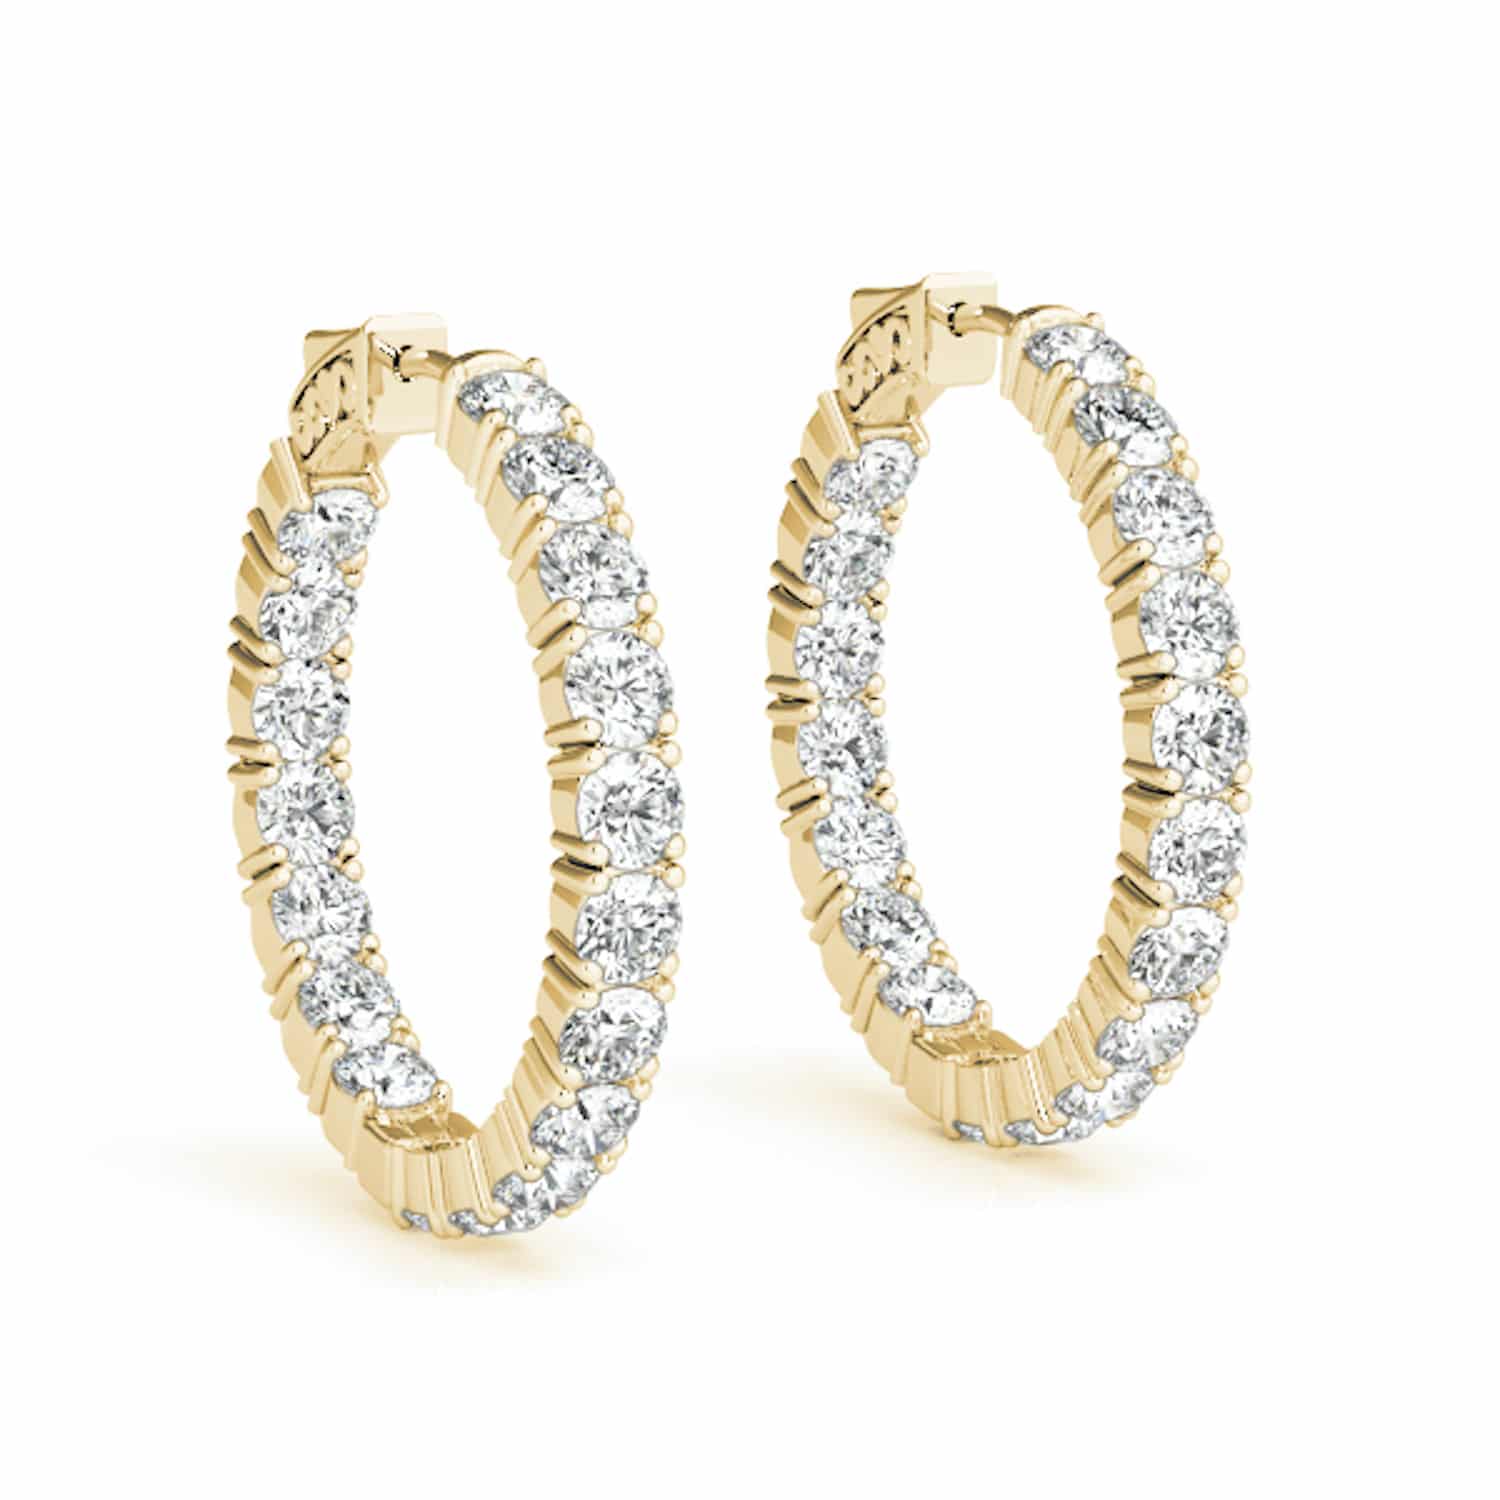 3.6CTW Natural Diamond 14K Gold Inside-Out Hinged Hoop Earrings 22mm - Yellow Gold